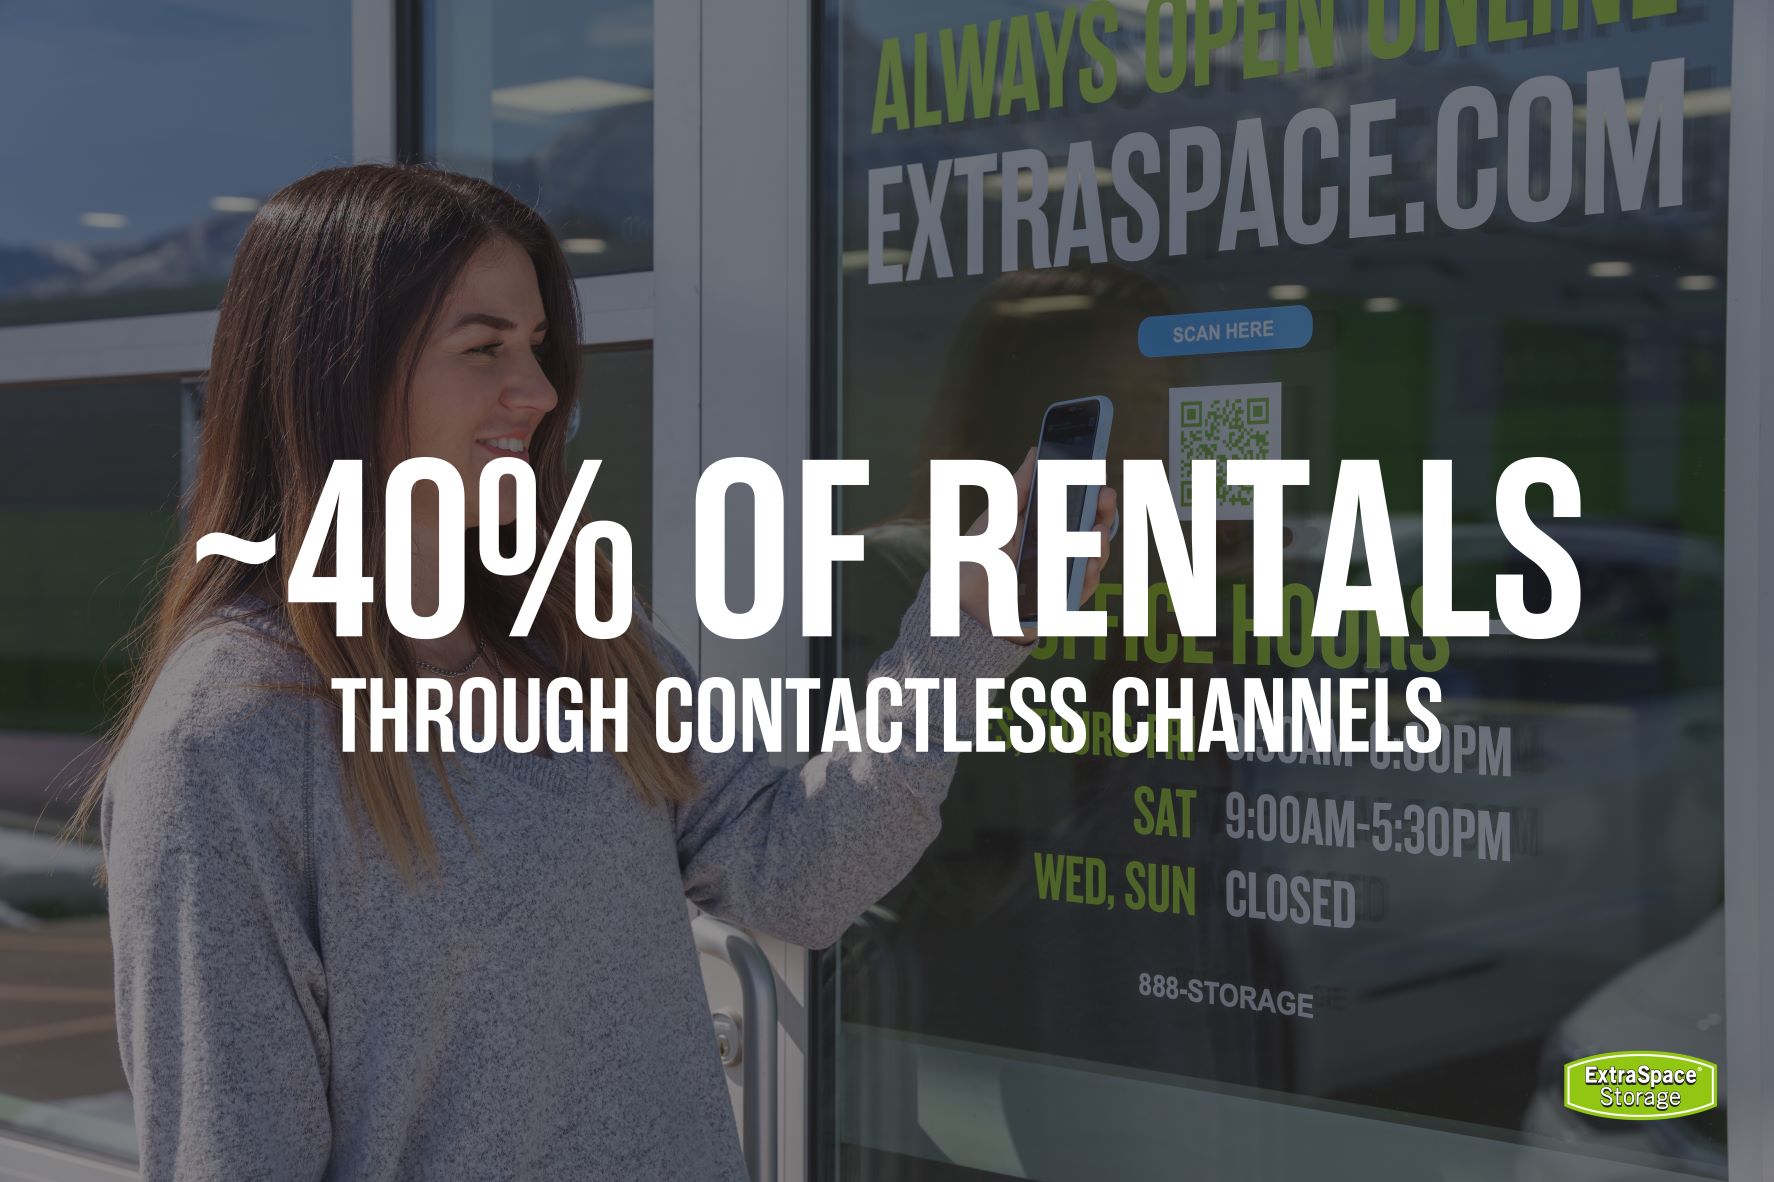 40% of rentals through contactless channels - Extra Space Storage 2021